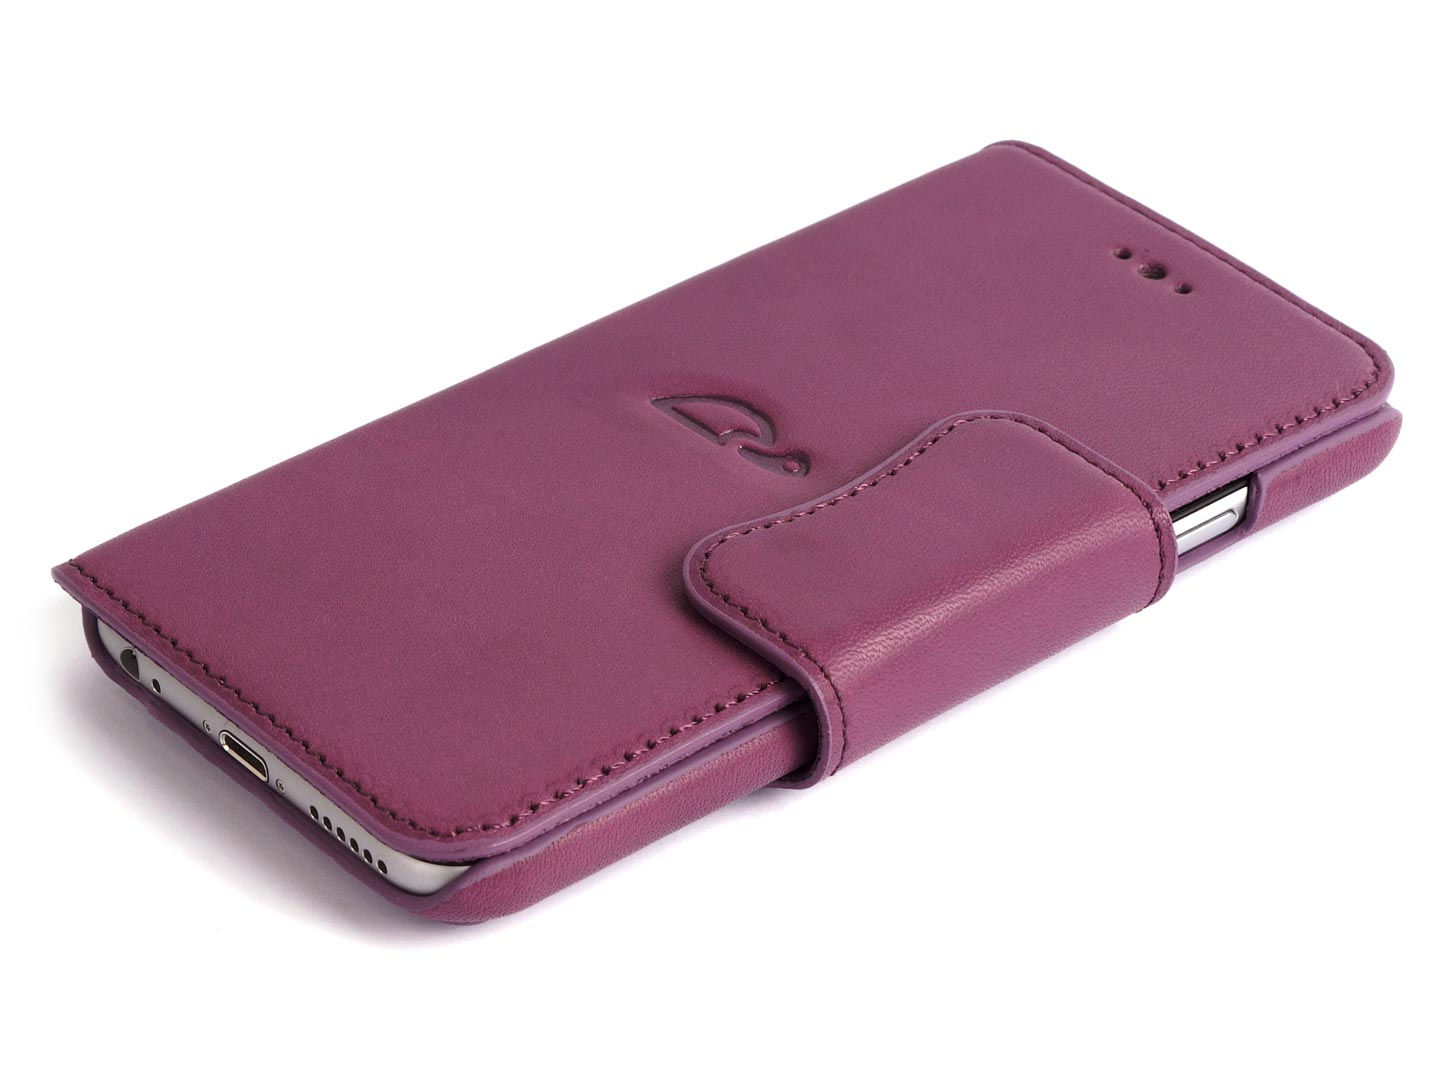 iphone 6 wallet case purple leather - Carapaz